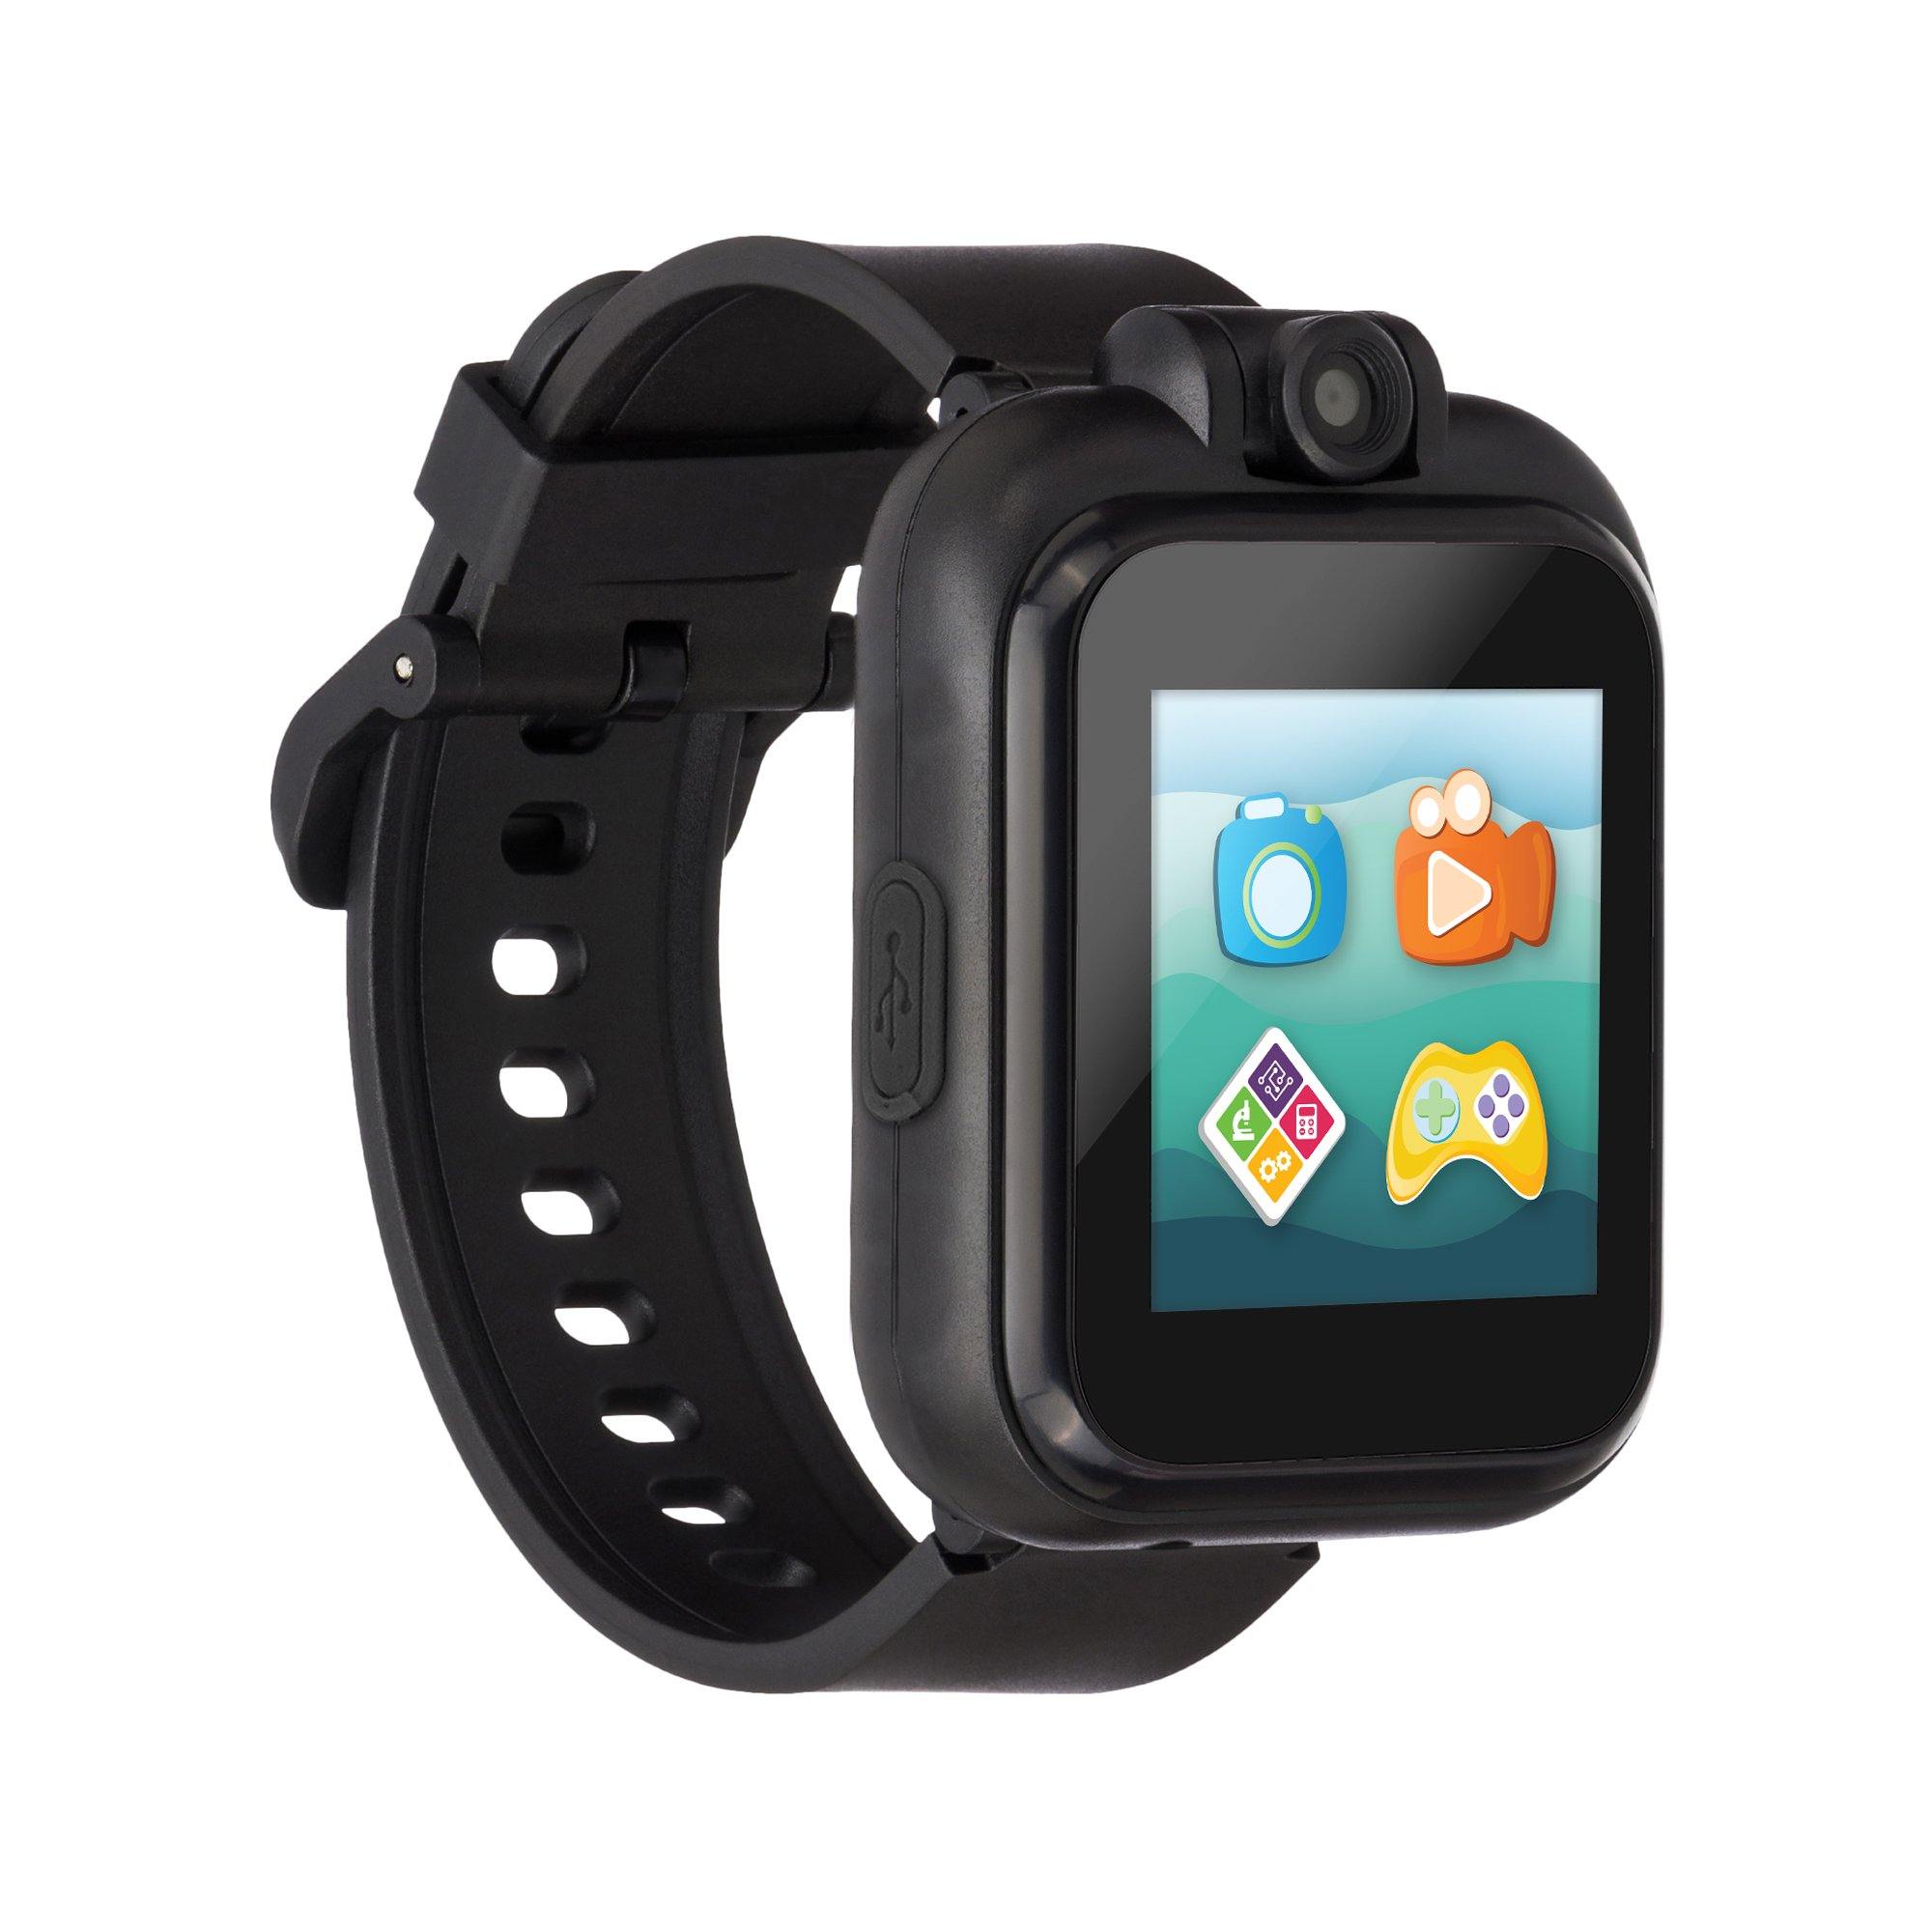 PlayZoom 2 Kids Smartwatch: Solid Black affordable smart watch